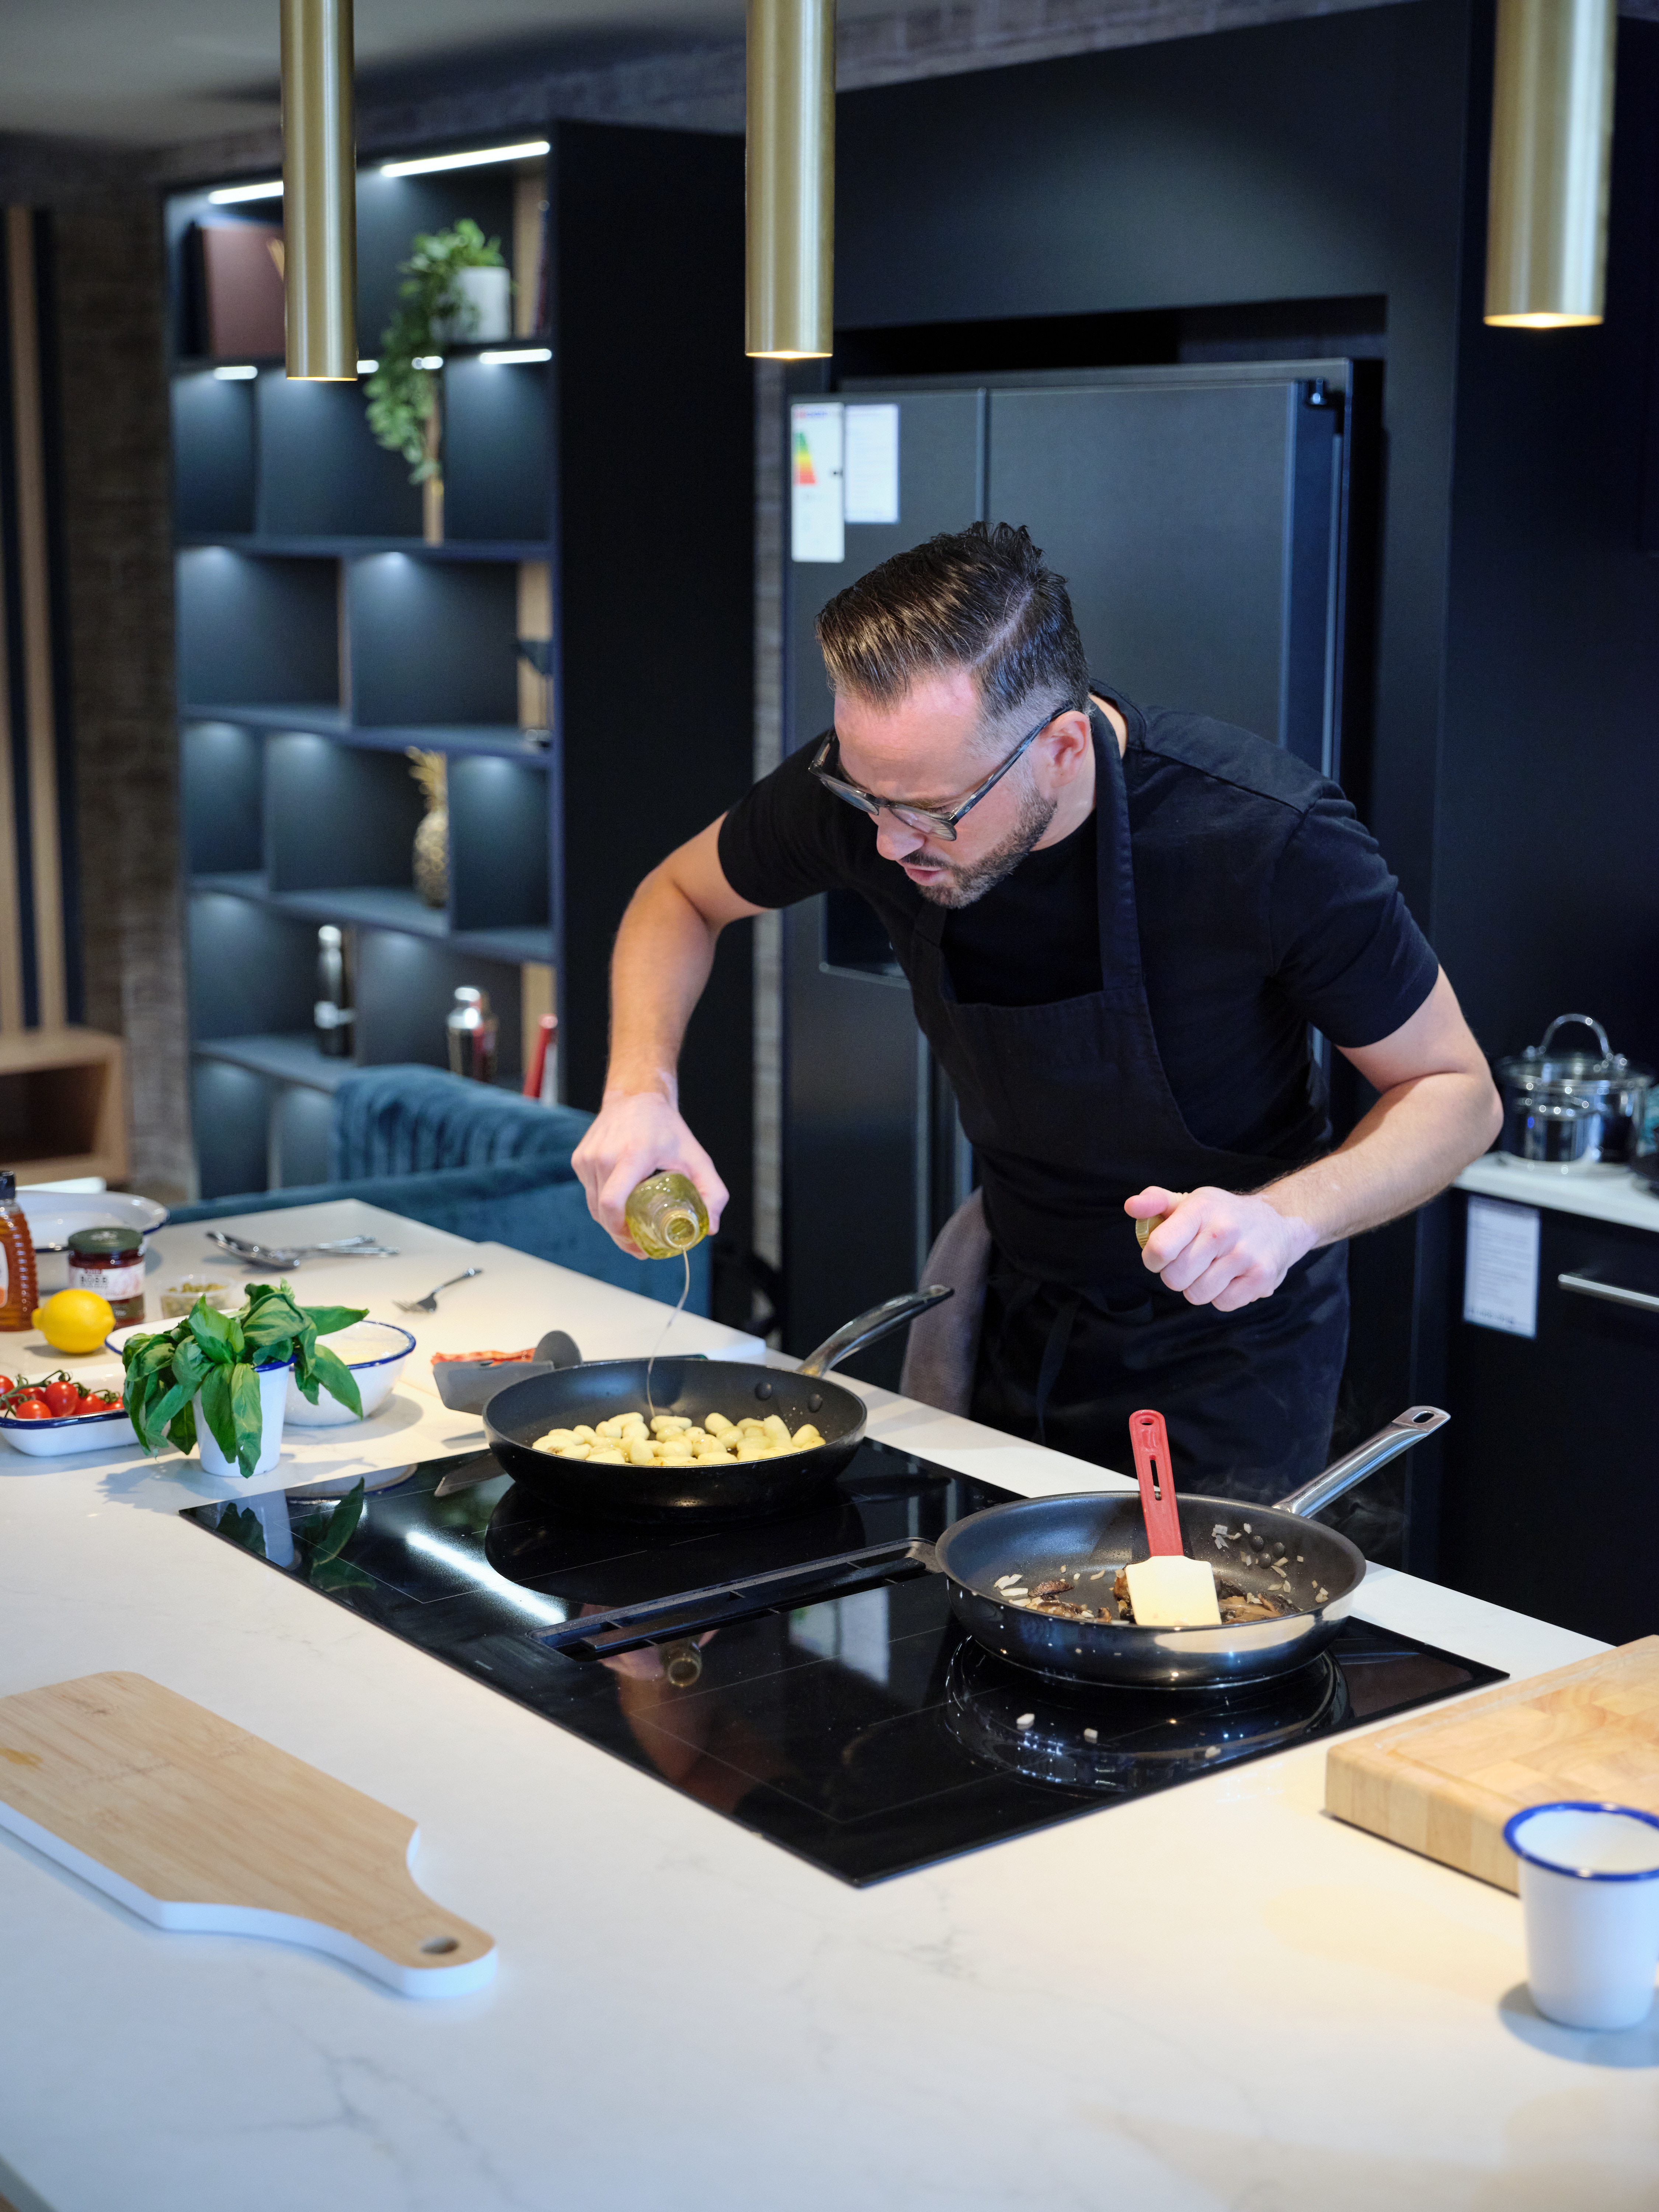 Enjoy exclusive recipes by Dean Edwards as seen at NE Appliances Launch Event